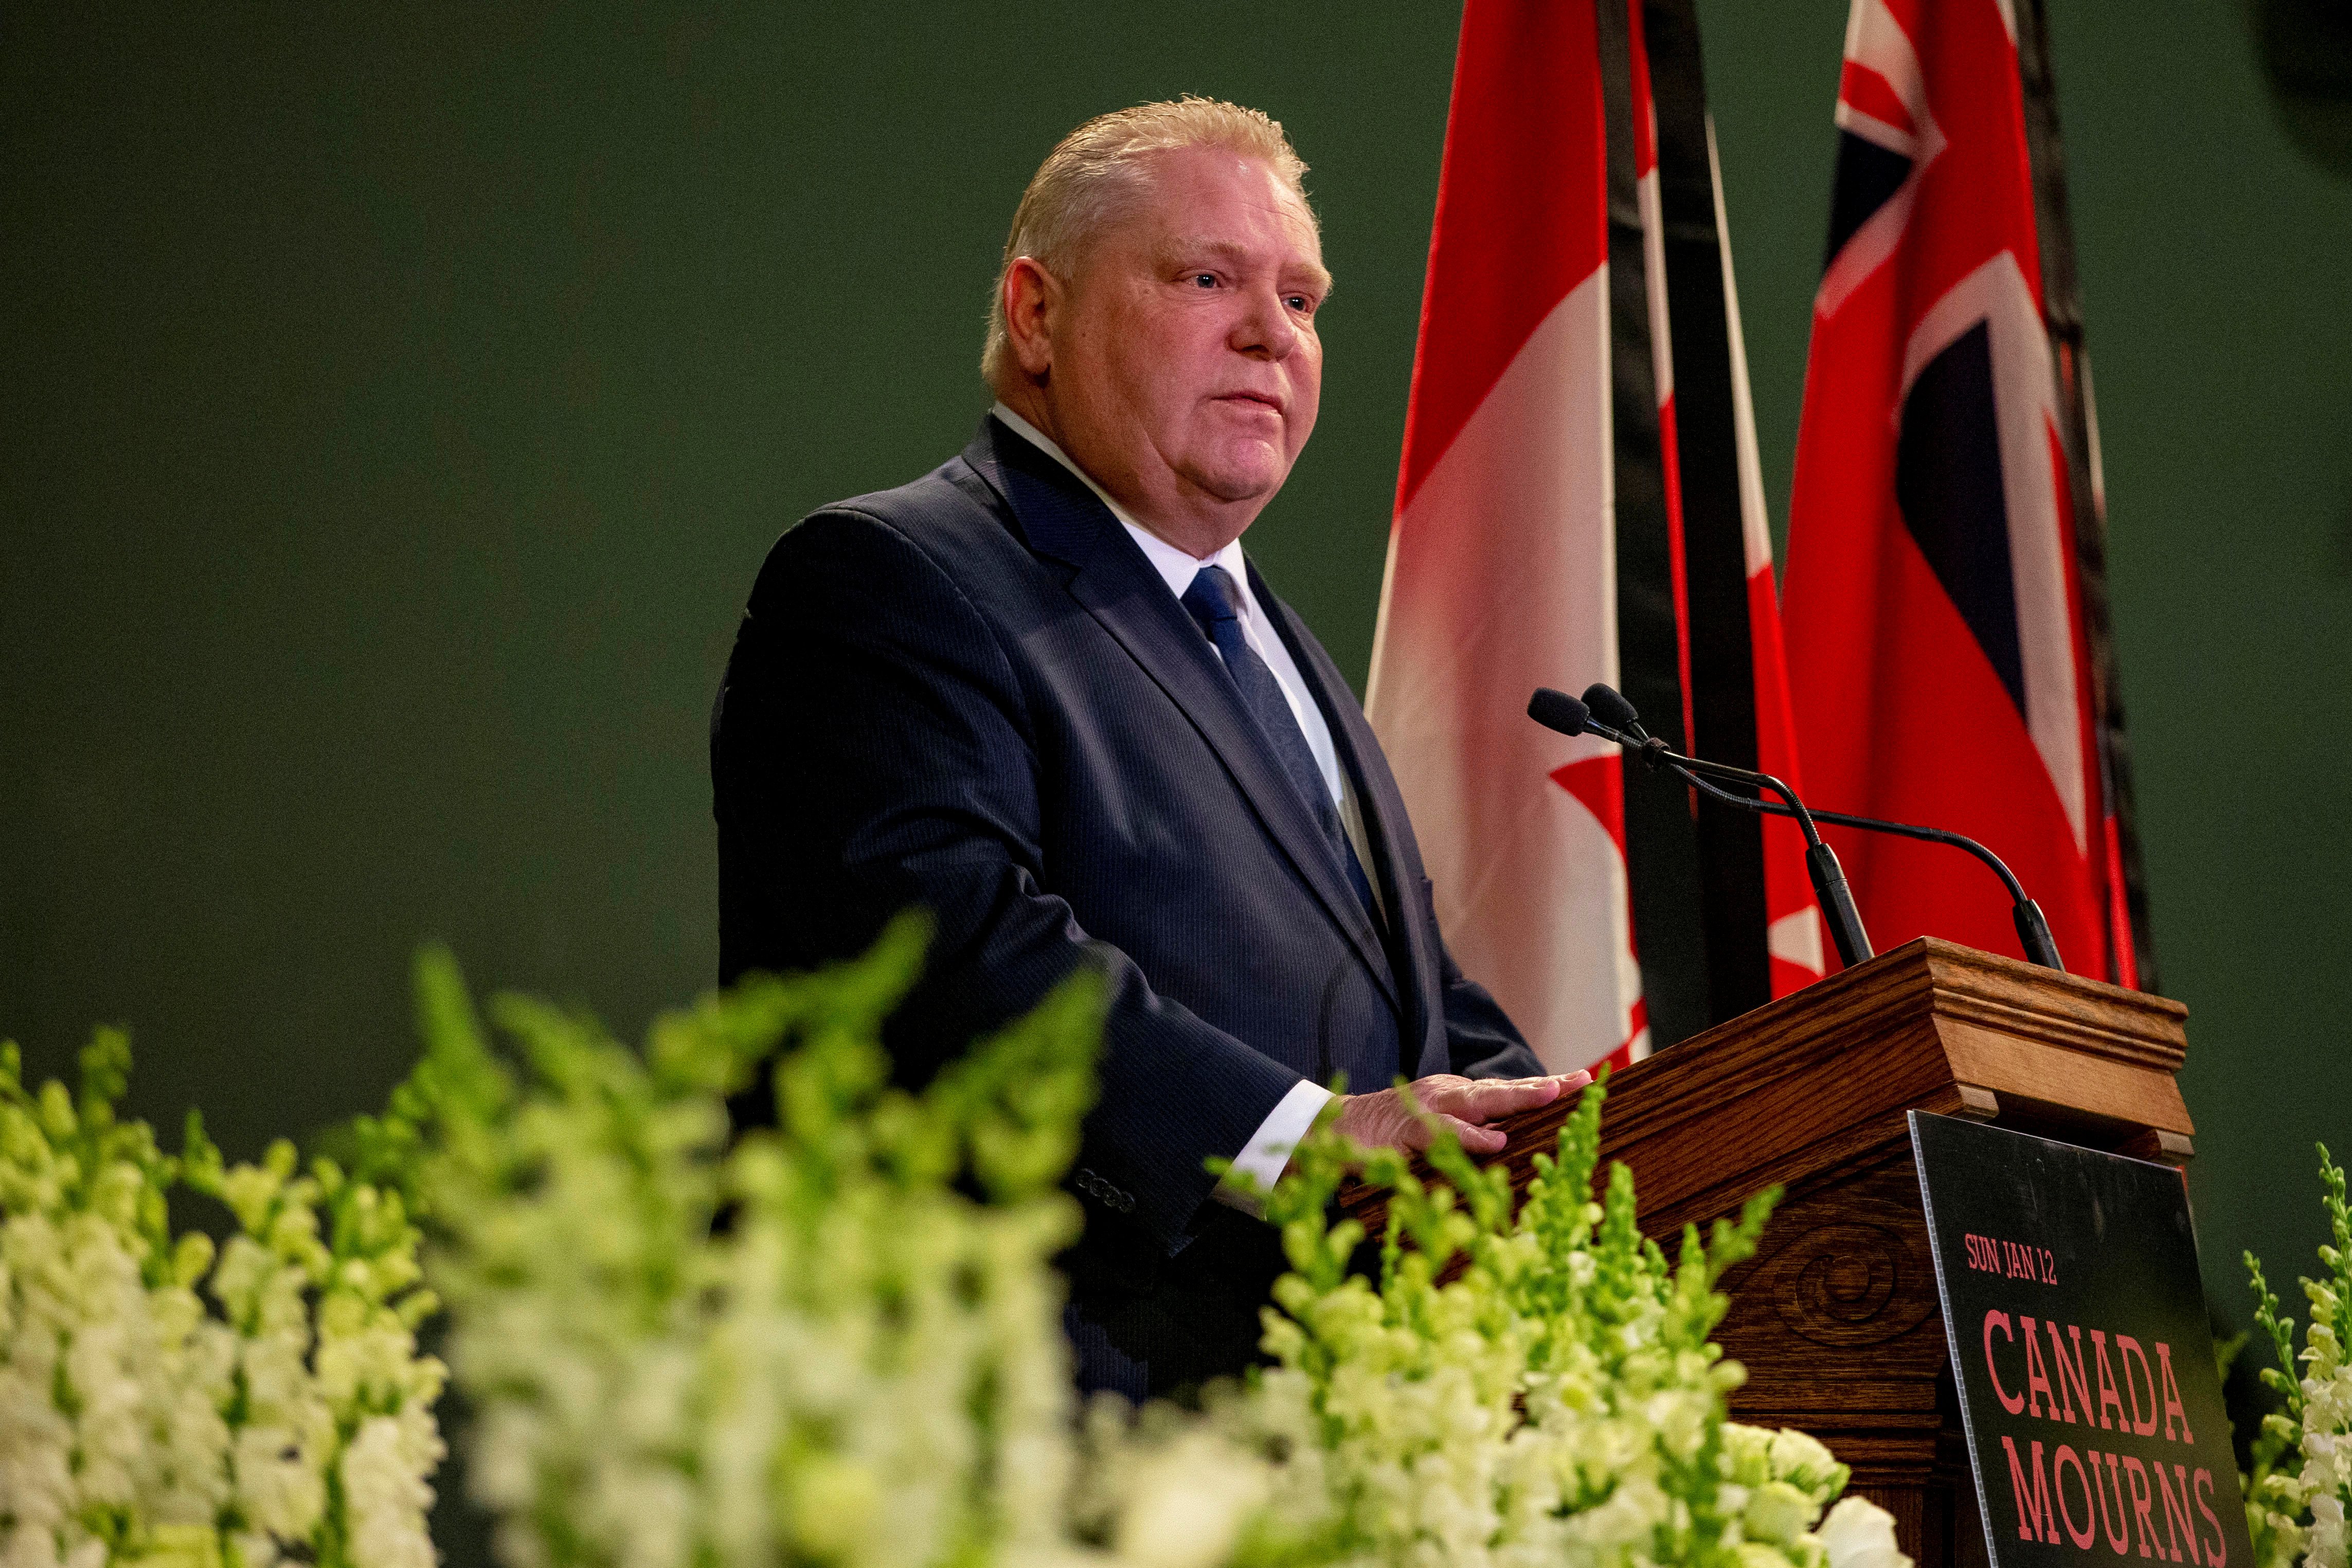 Ontario Premier Doug Ford attends a memorial for the victims of a Ukrainian passenger plane which was shot down in Iran, at Convocation Hall in Toronto, Ontario, Canada Jan. 12, 2020. REUTERS/Carlos Osorio